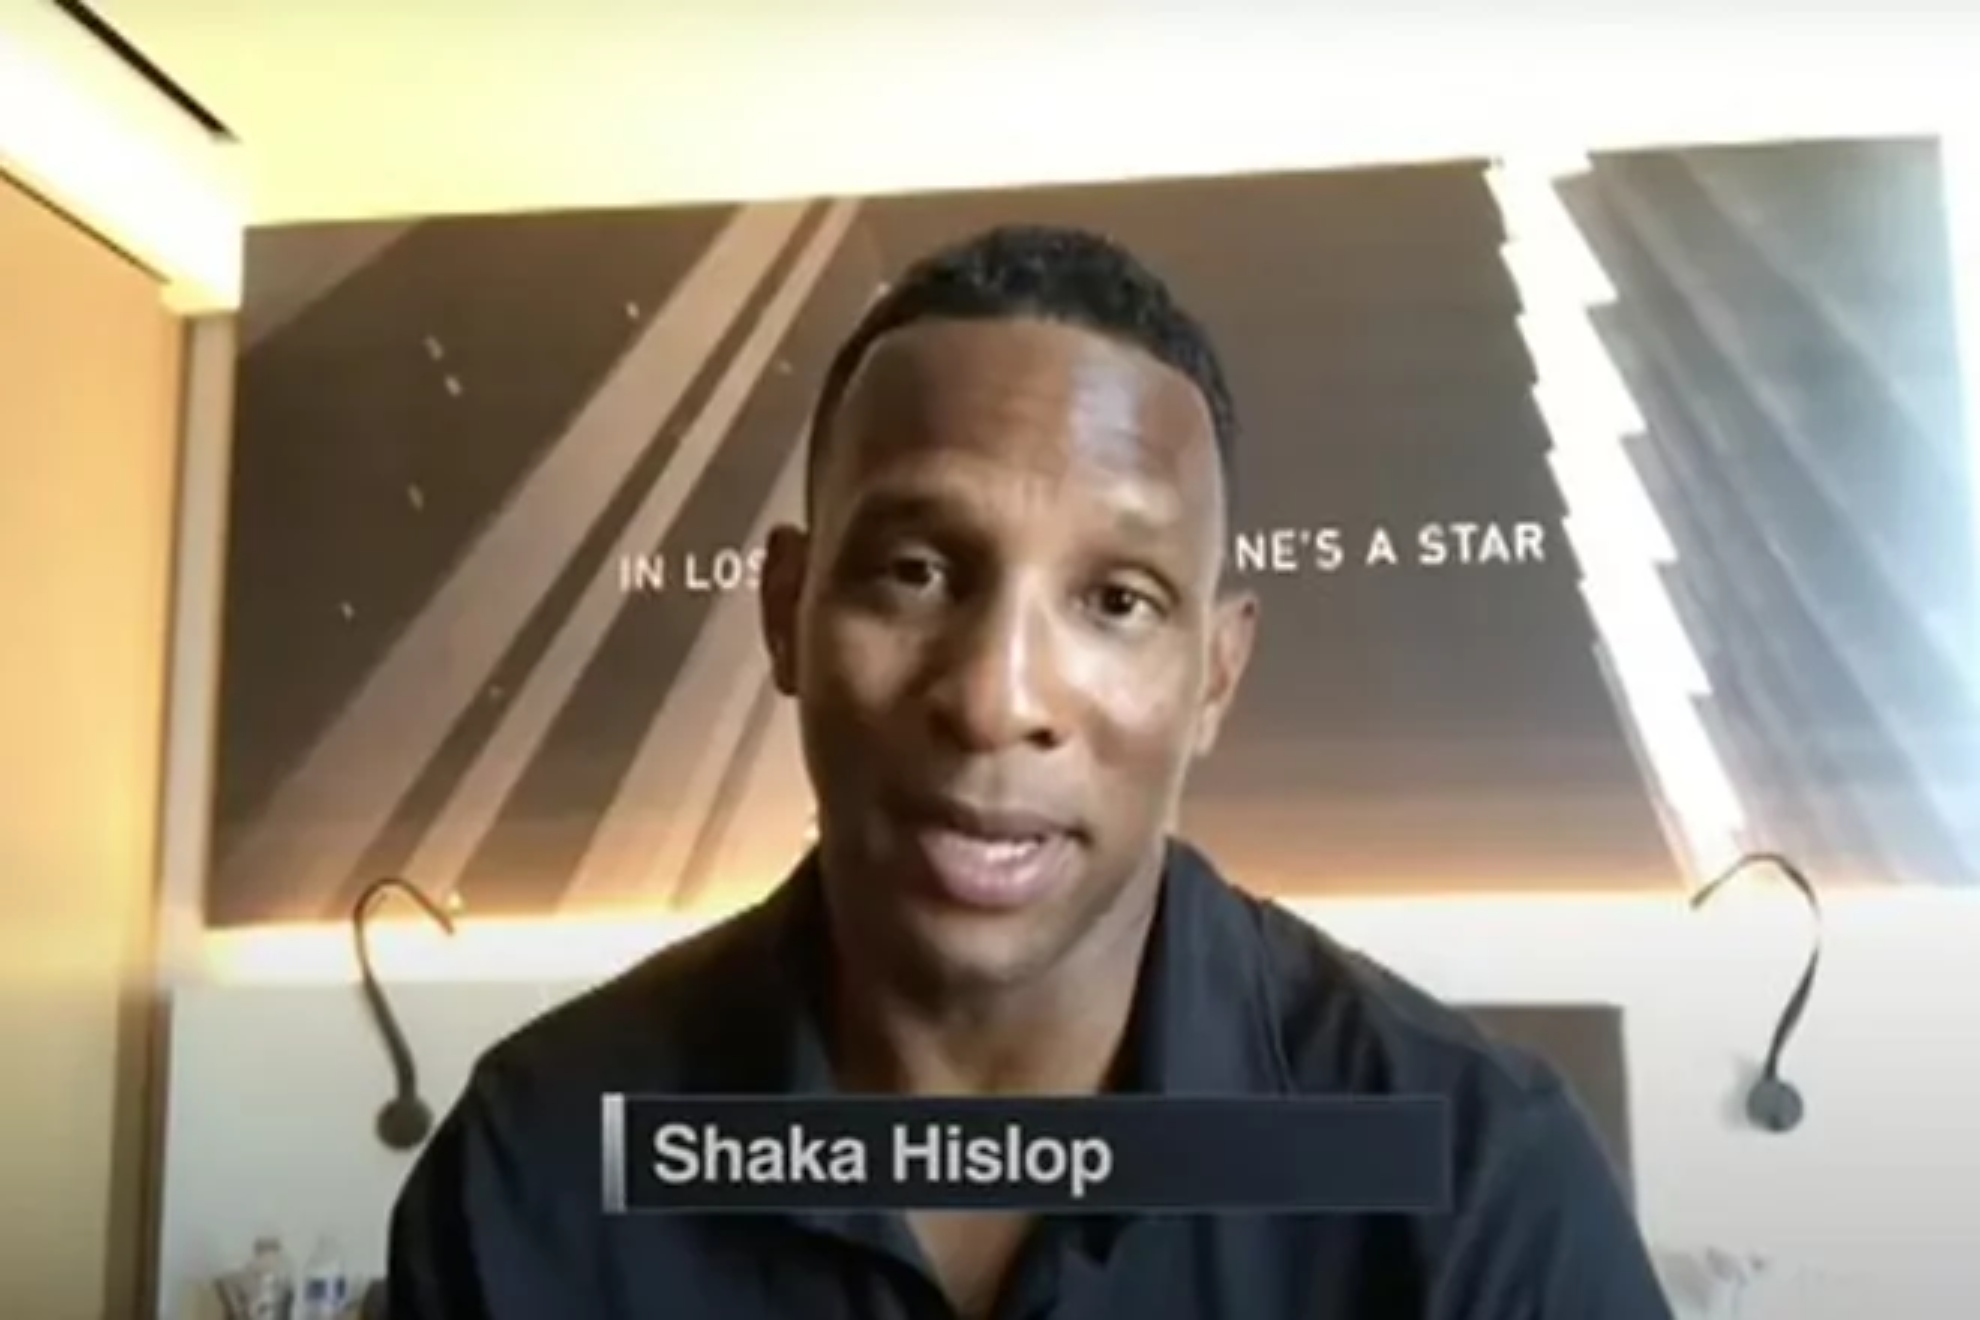 ESPNs Shaka Hislop gives update on health after collapse